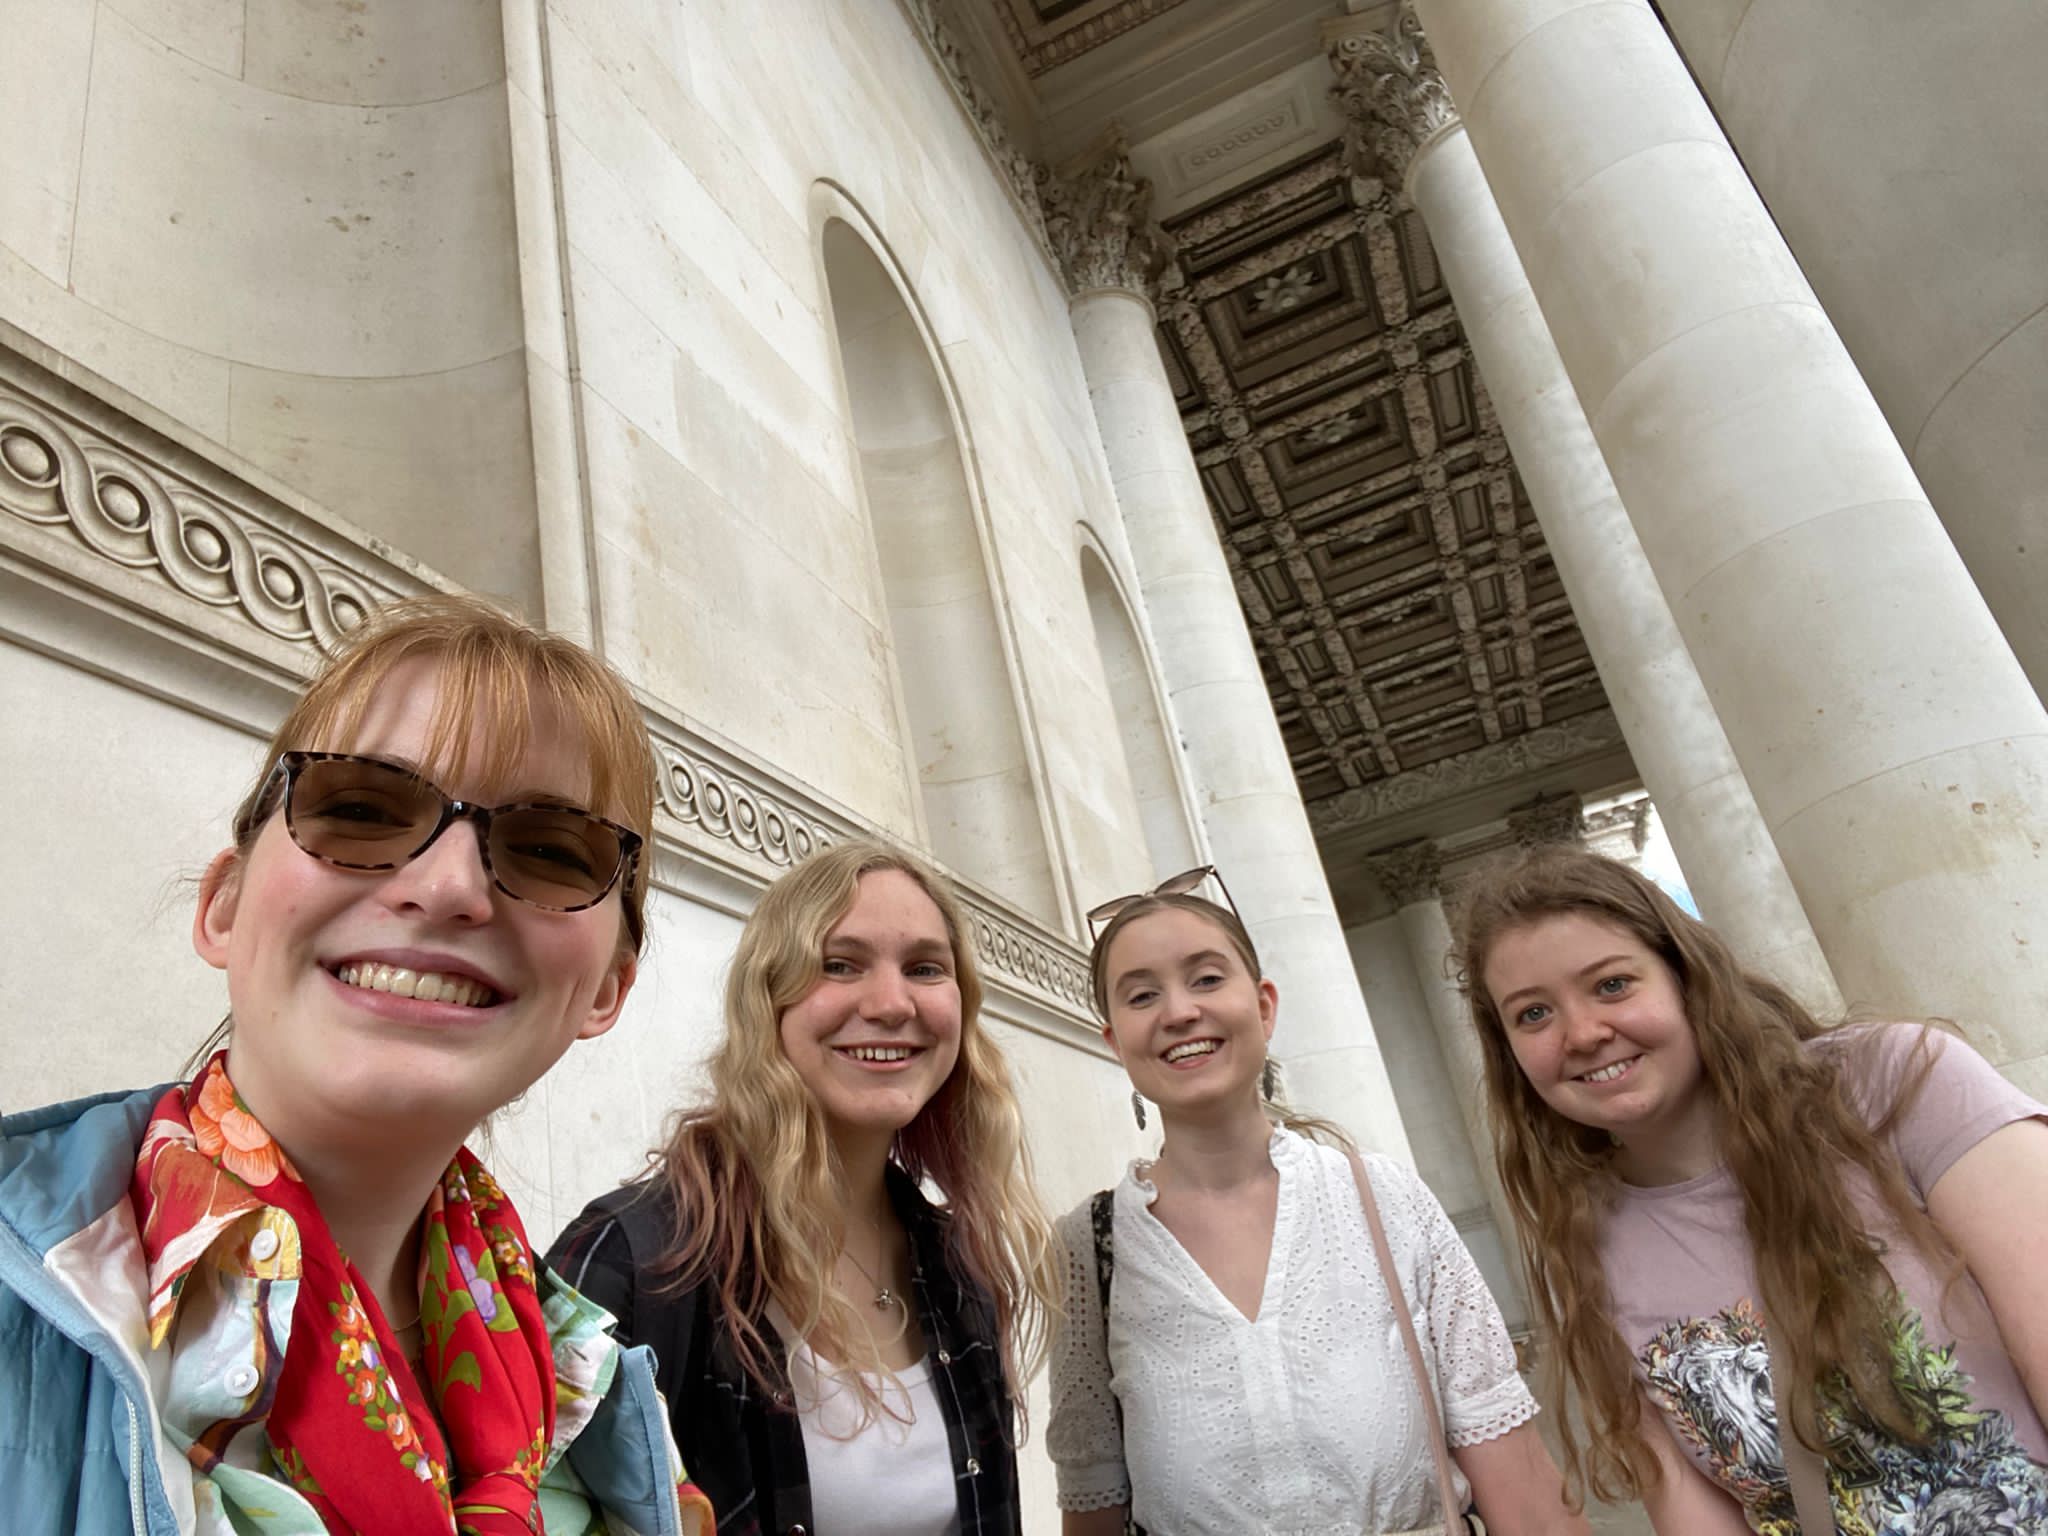 Selfie with four students, next to some pillars and under an ornately decorated ceiling.